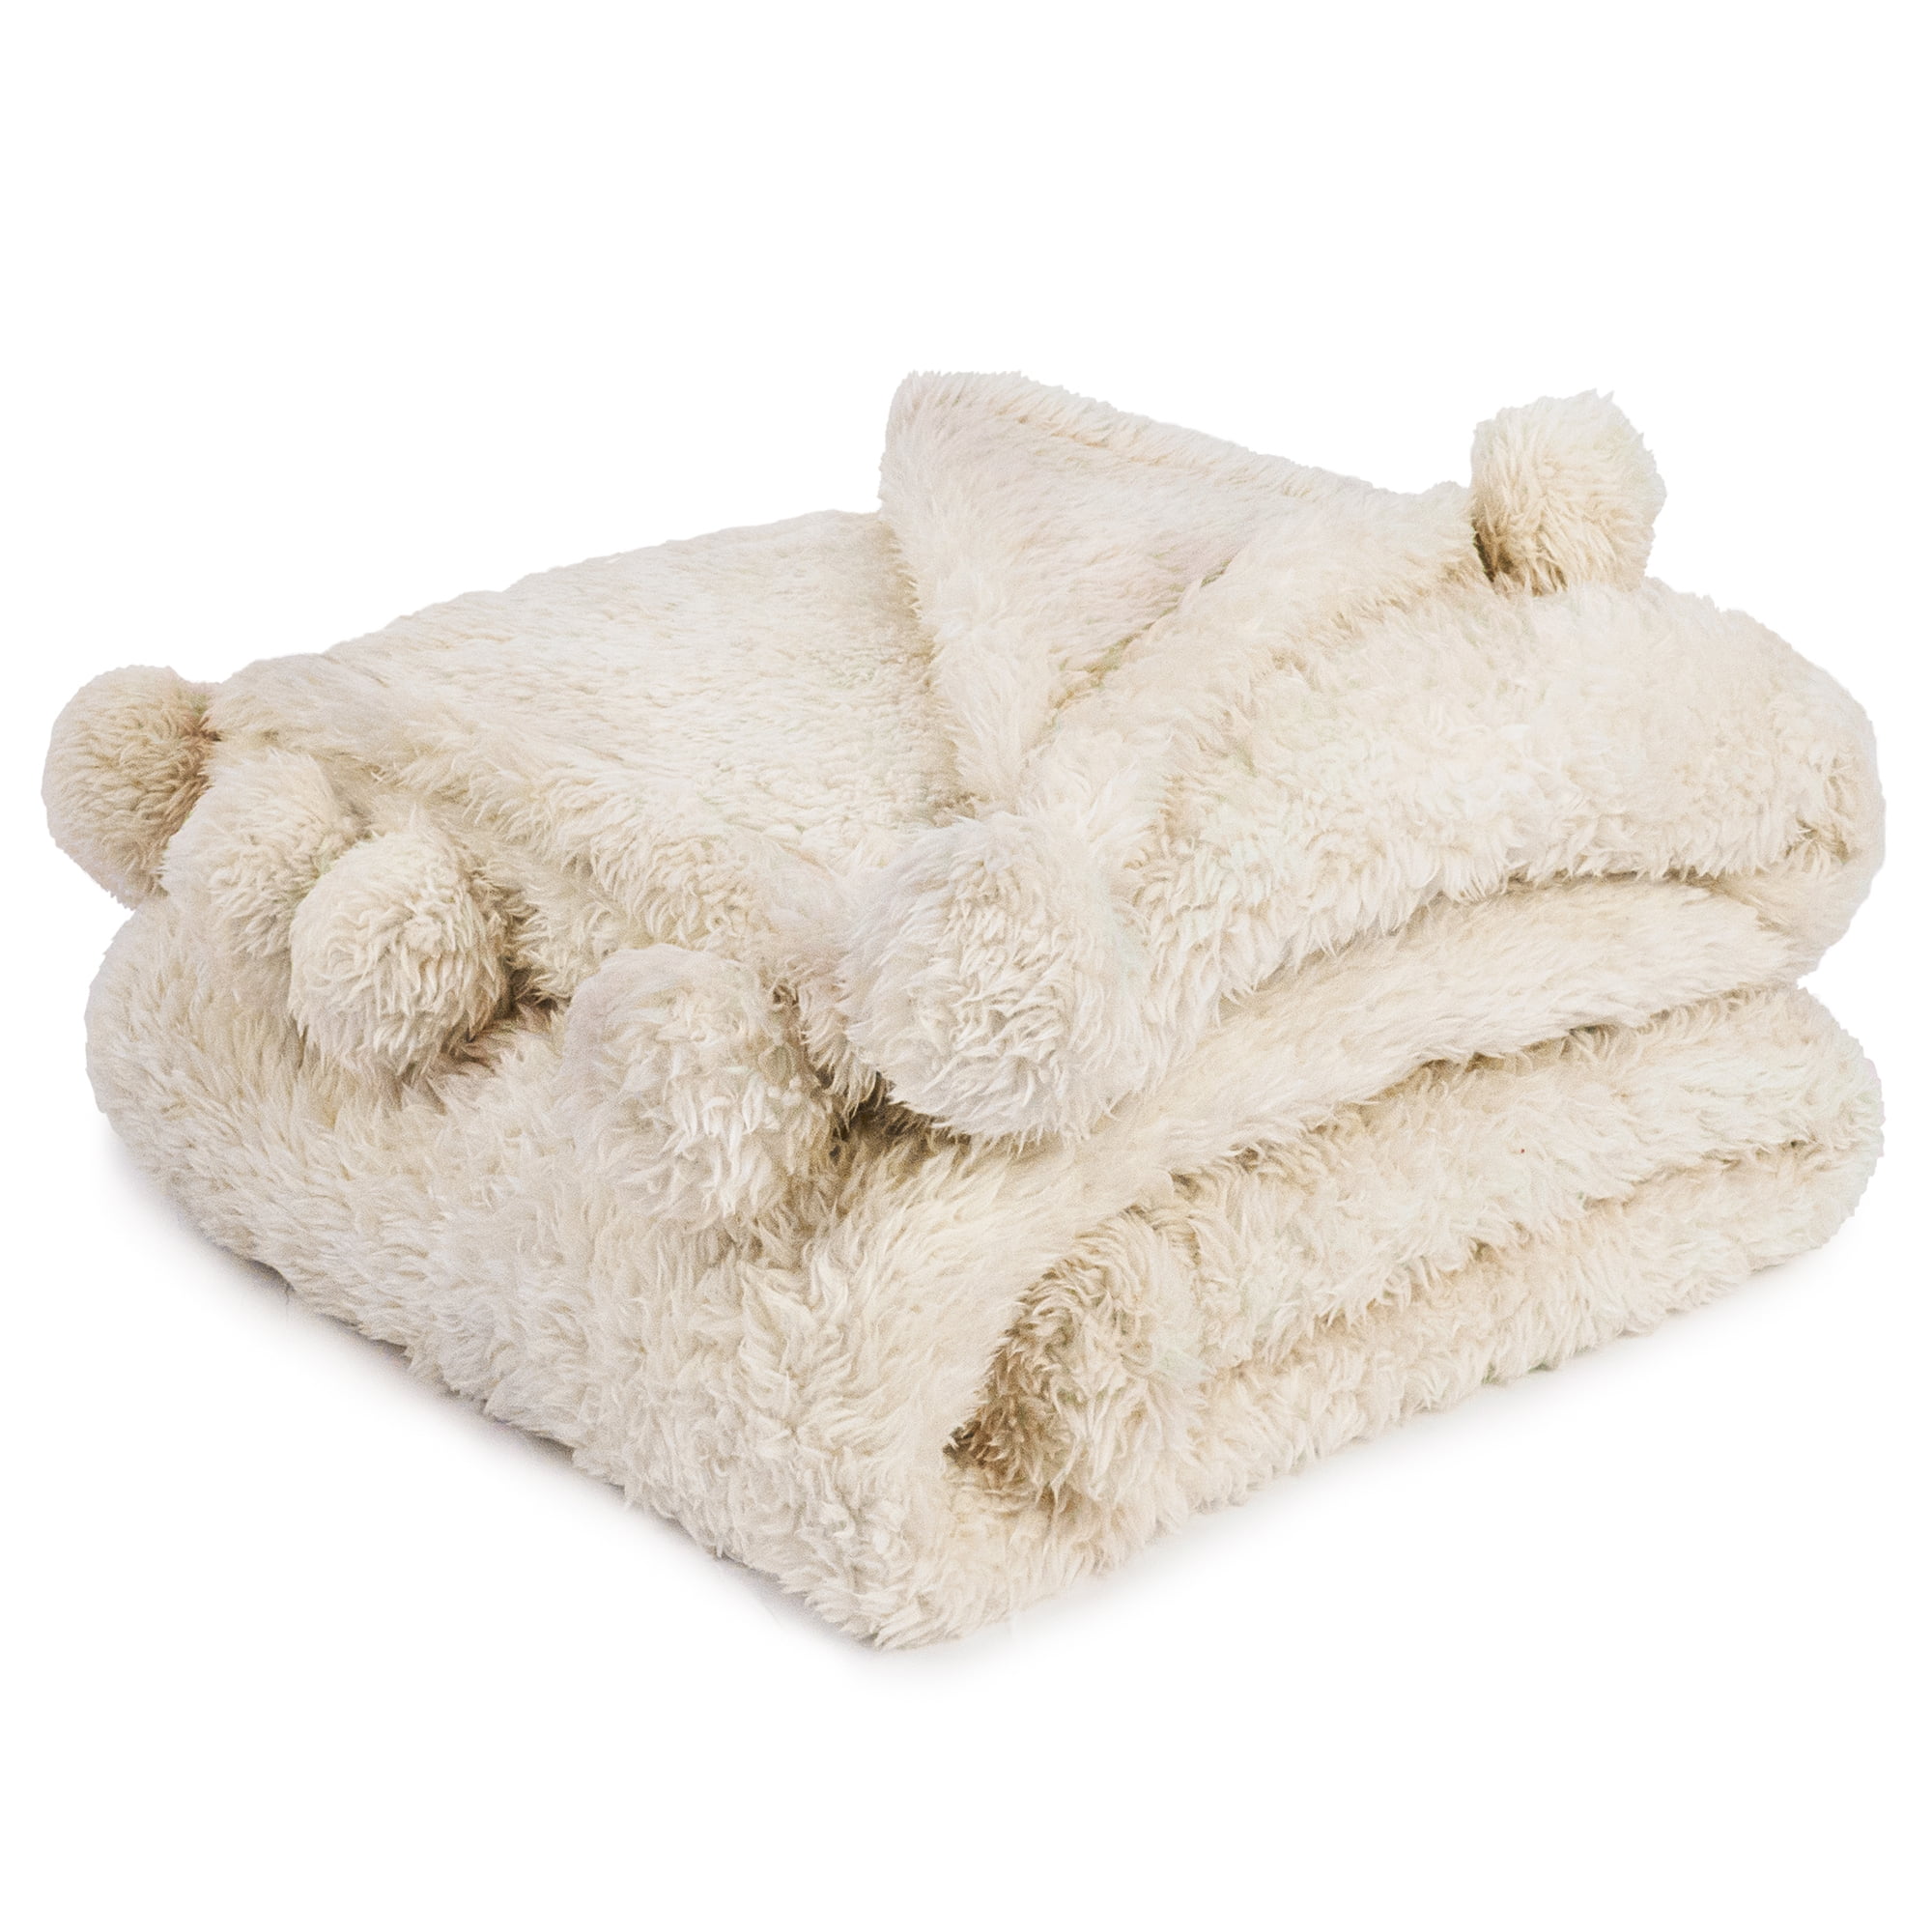 Super Soft Thick Fuzzy Bed Blankets for Couch Bed Sofa Chair White Christmas And Cute Snowman Plush Fluffy Reversible Sherpa Fleece Cover 60x80 Inch Sherpa Fleece Throw Blanket for All Seasons 